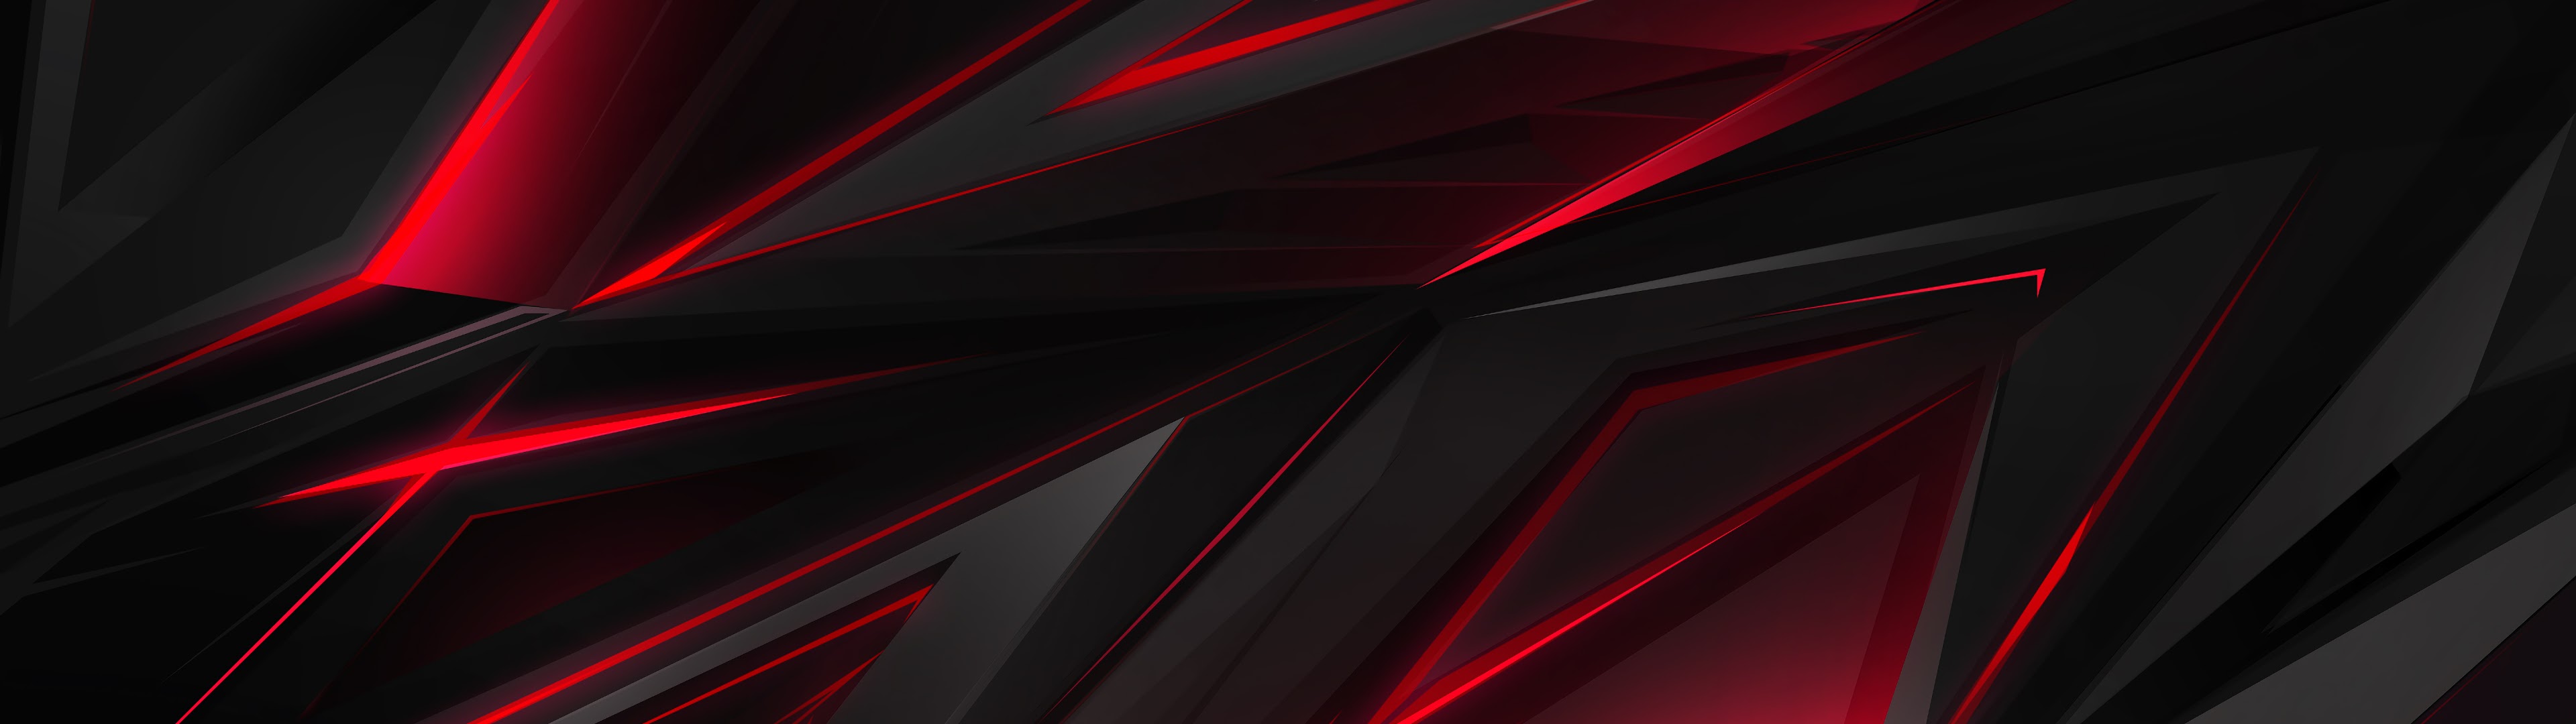 Black Red Abstract Polygon 3D 4K Wallpaper #45